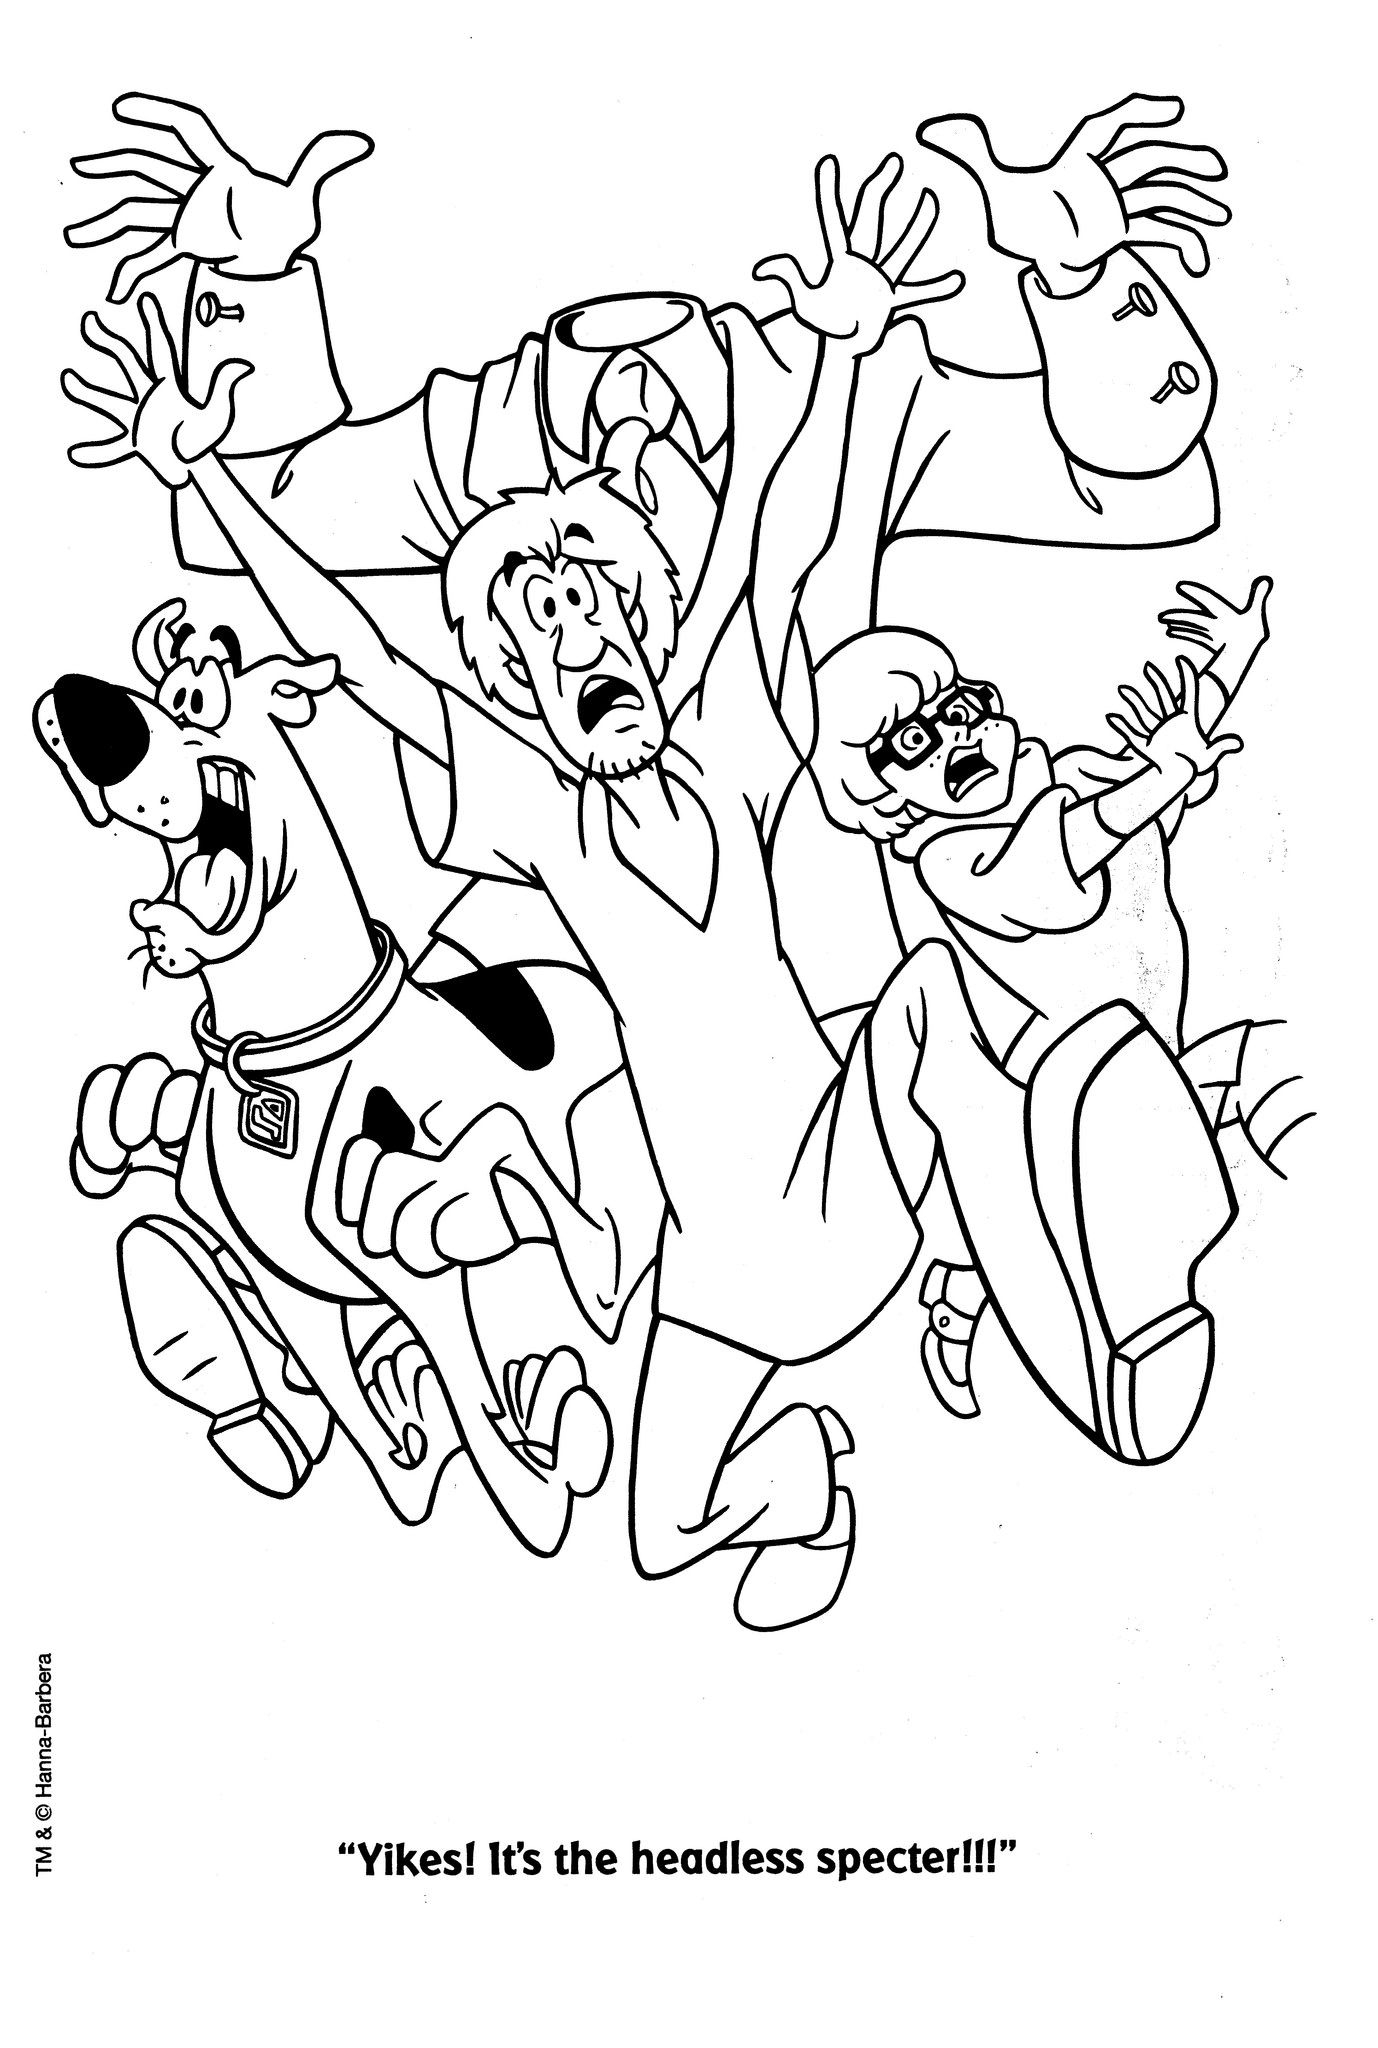 Scooby Doo - (23) | Scooby Doo Coloring Pages, Cartoon pour Scooby Doo À Colorier